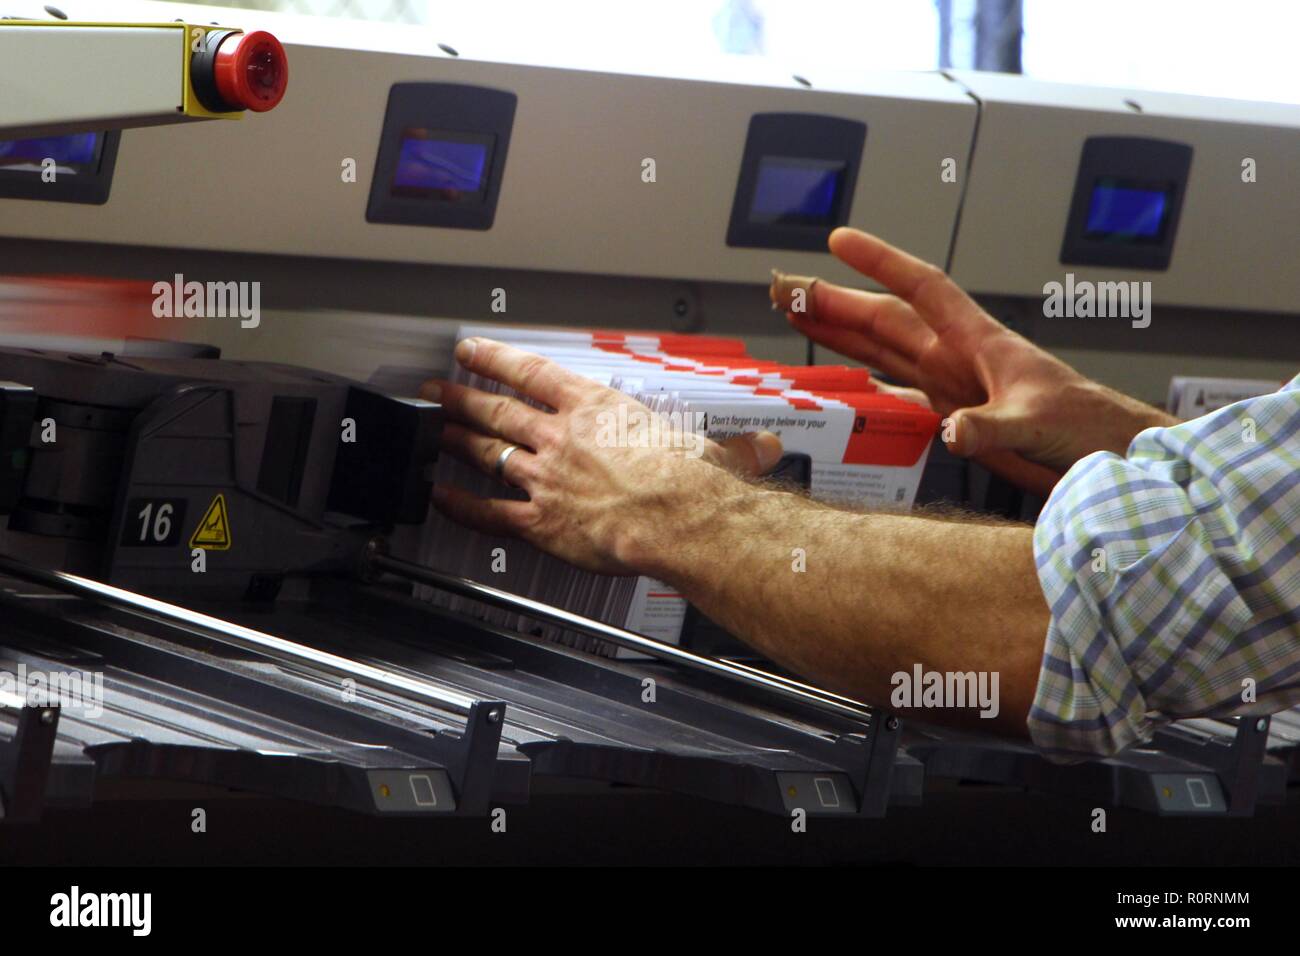 A poll worker seen pulling ballots from a processing machine at the King County Elections headquarters in Renton, Voting in Washington state is done by mail and returned ballots are sorted and registered by machine before being counted. More than US$30 million has been spent on the race between Republican Dino Rossi and Democrat Kim Schrier in Washington's 8th Congressional District, one of the five most expensive contests in the country in 2018. Stock Photo